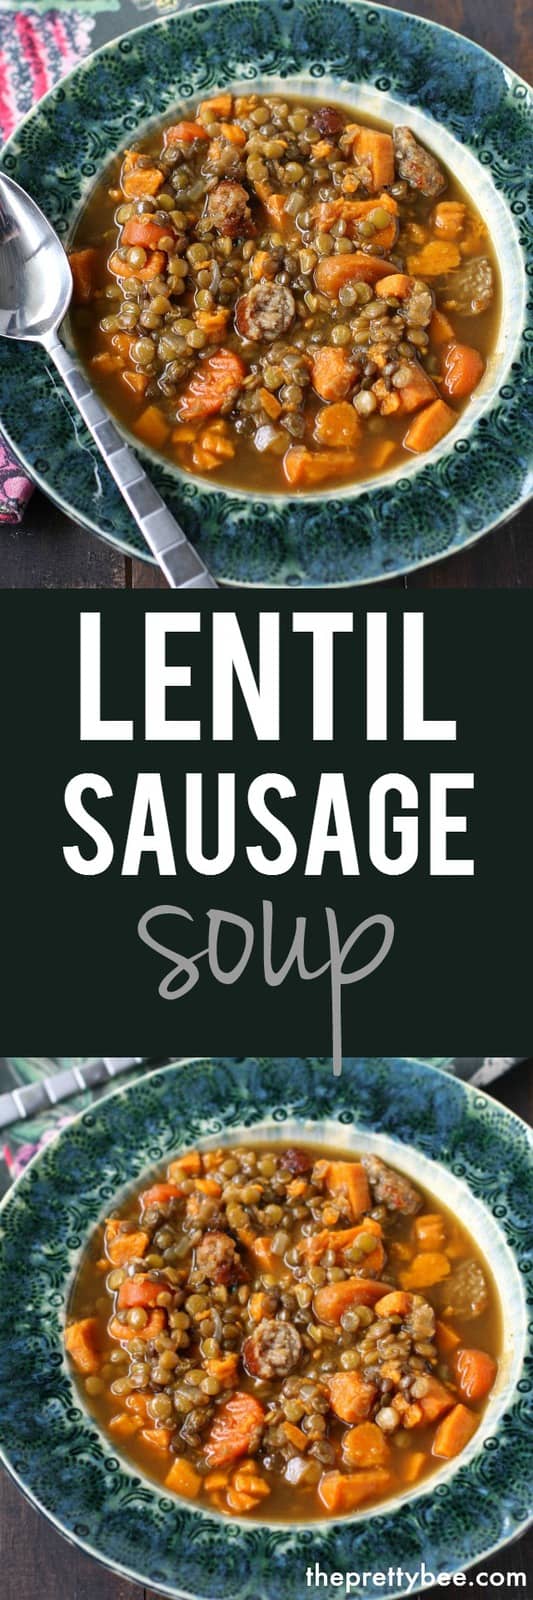 This sausage lentil soup is the perfect cozy recipe for a chilly day! Gluten free and allergy friendly soup recipe.